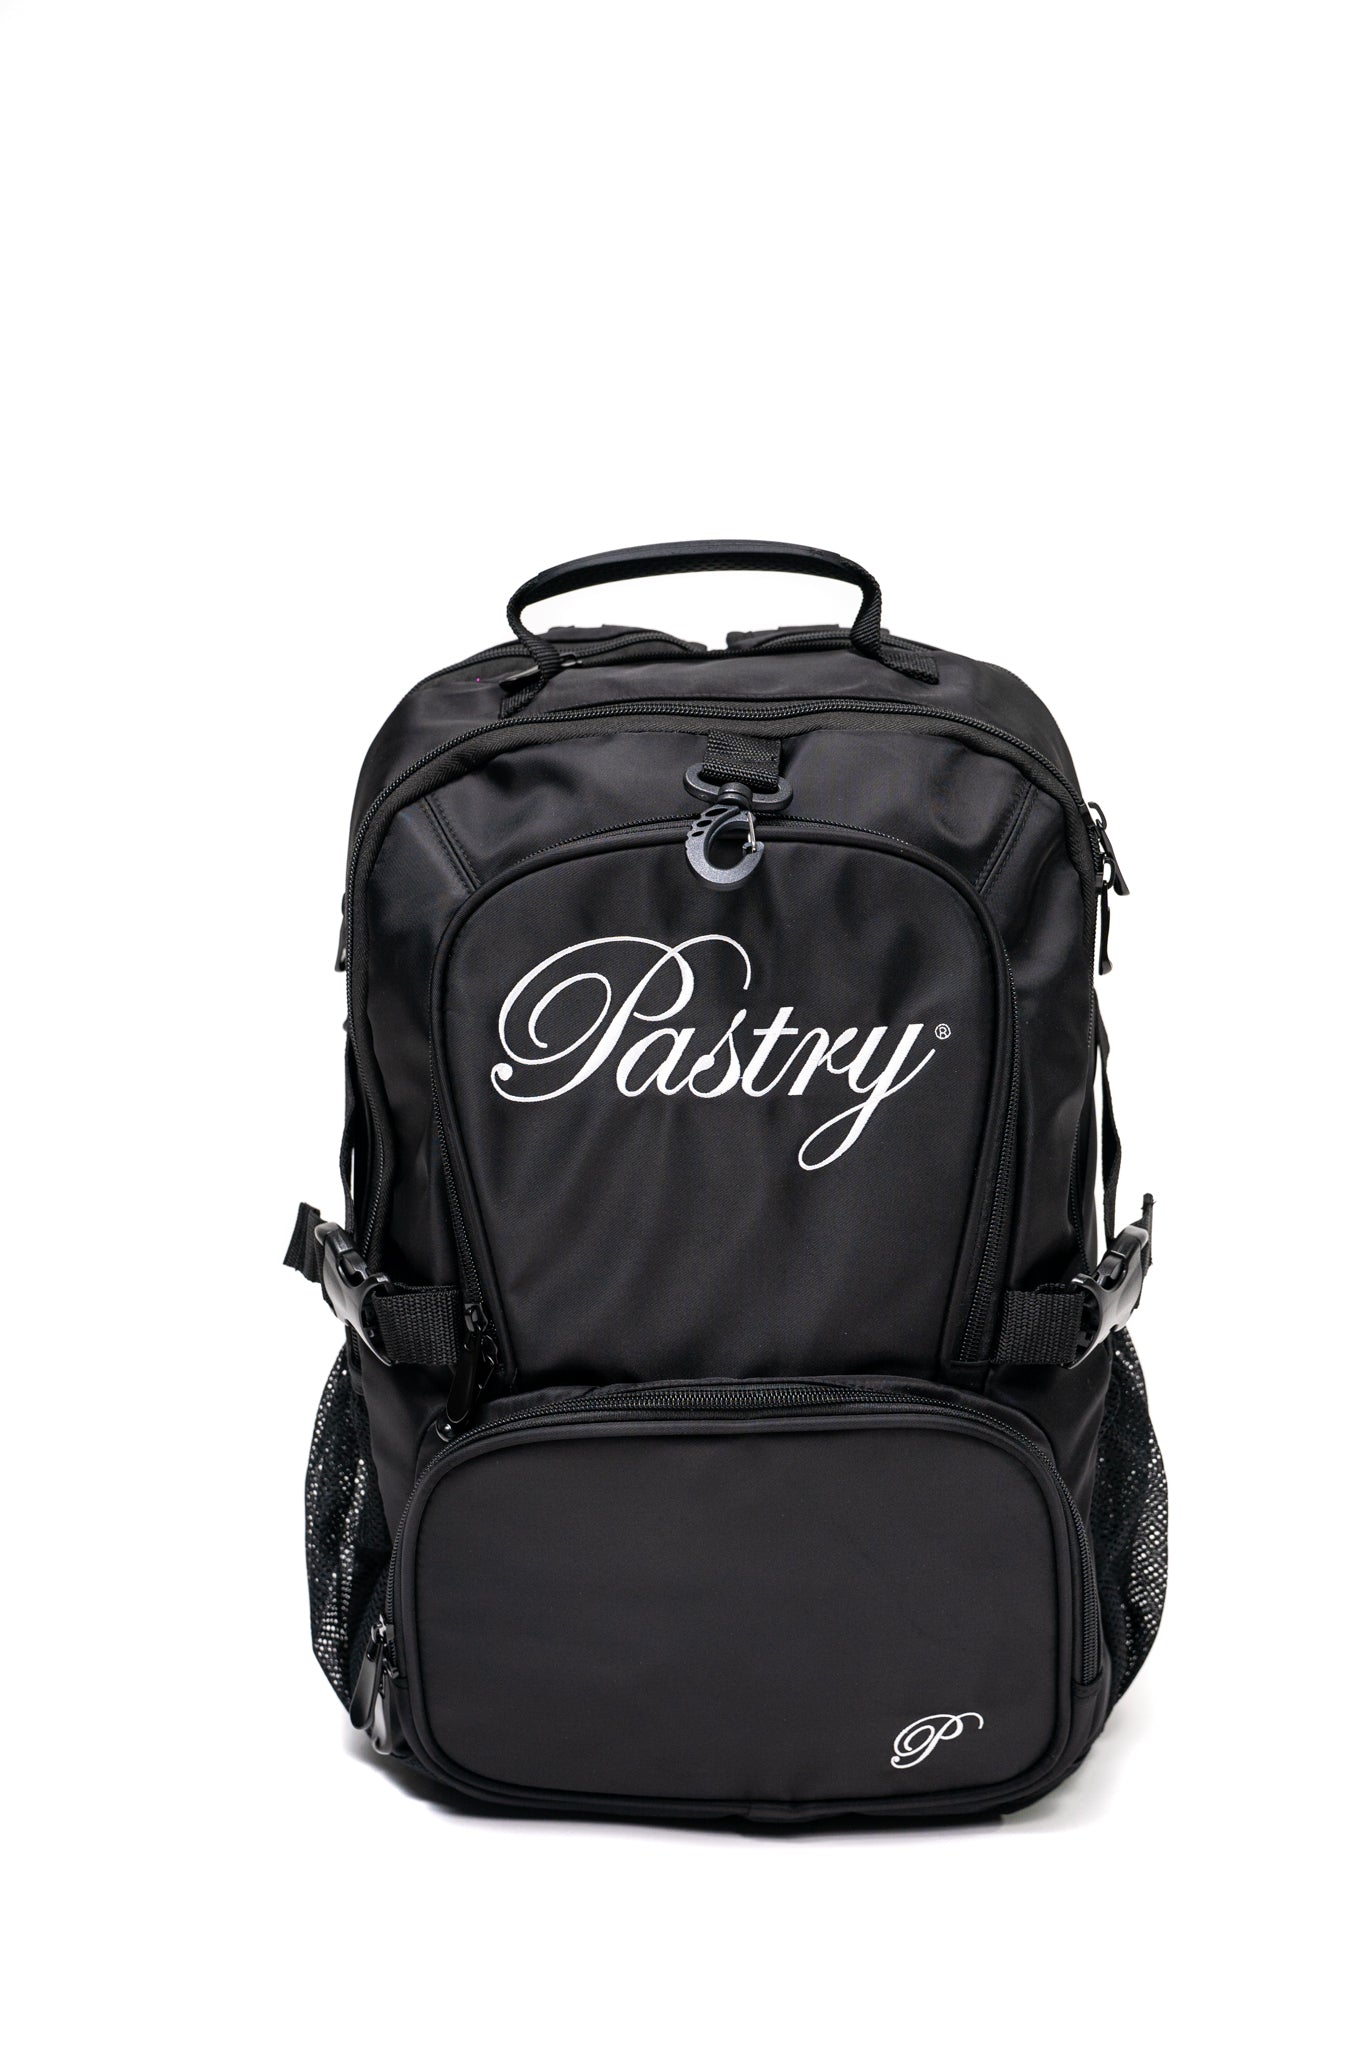 Pastry Backpack Solid Black